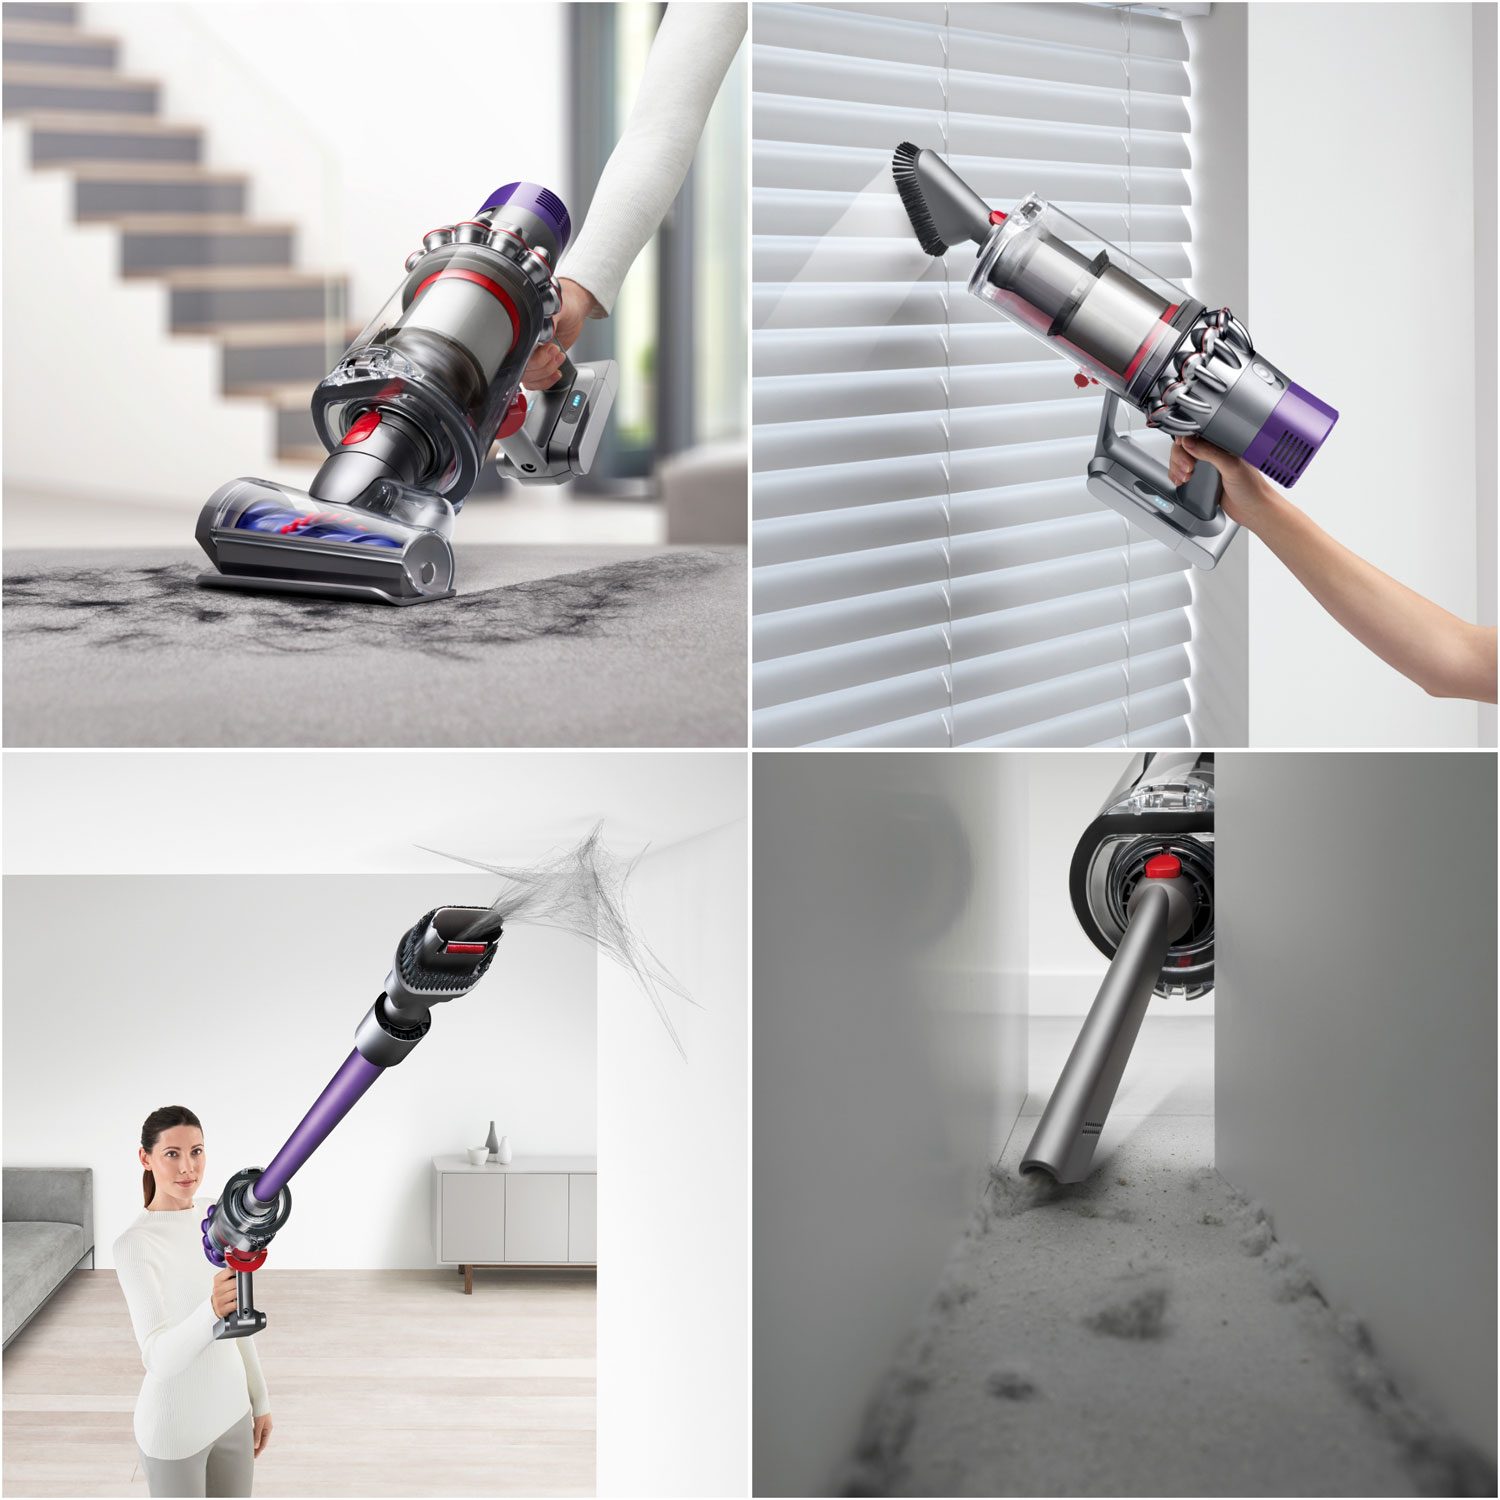 Dyson Dyson V10 Animal Cordless Stick Vacuum Cleaner 394429-01 - The Home  Depot